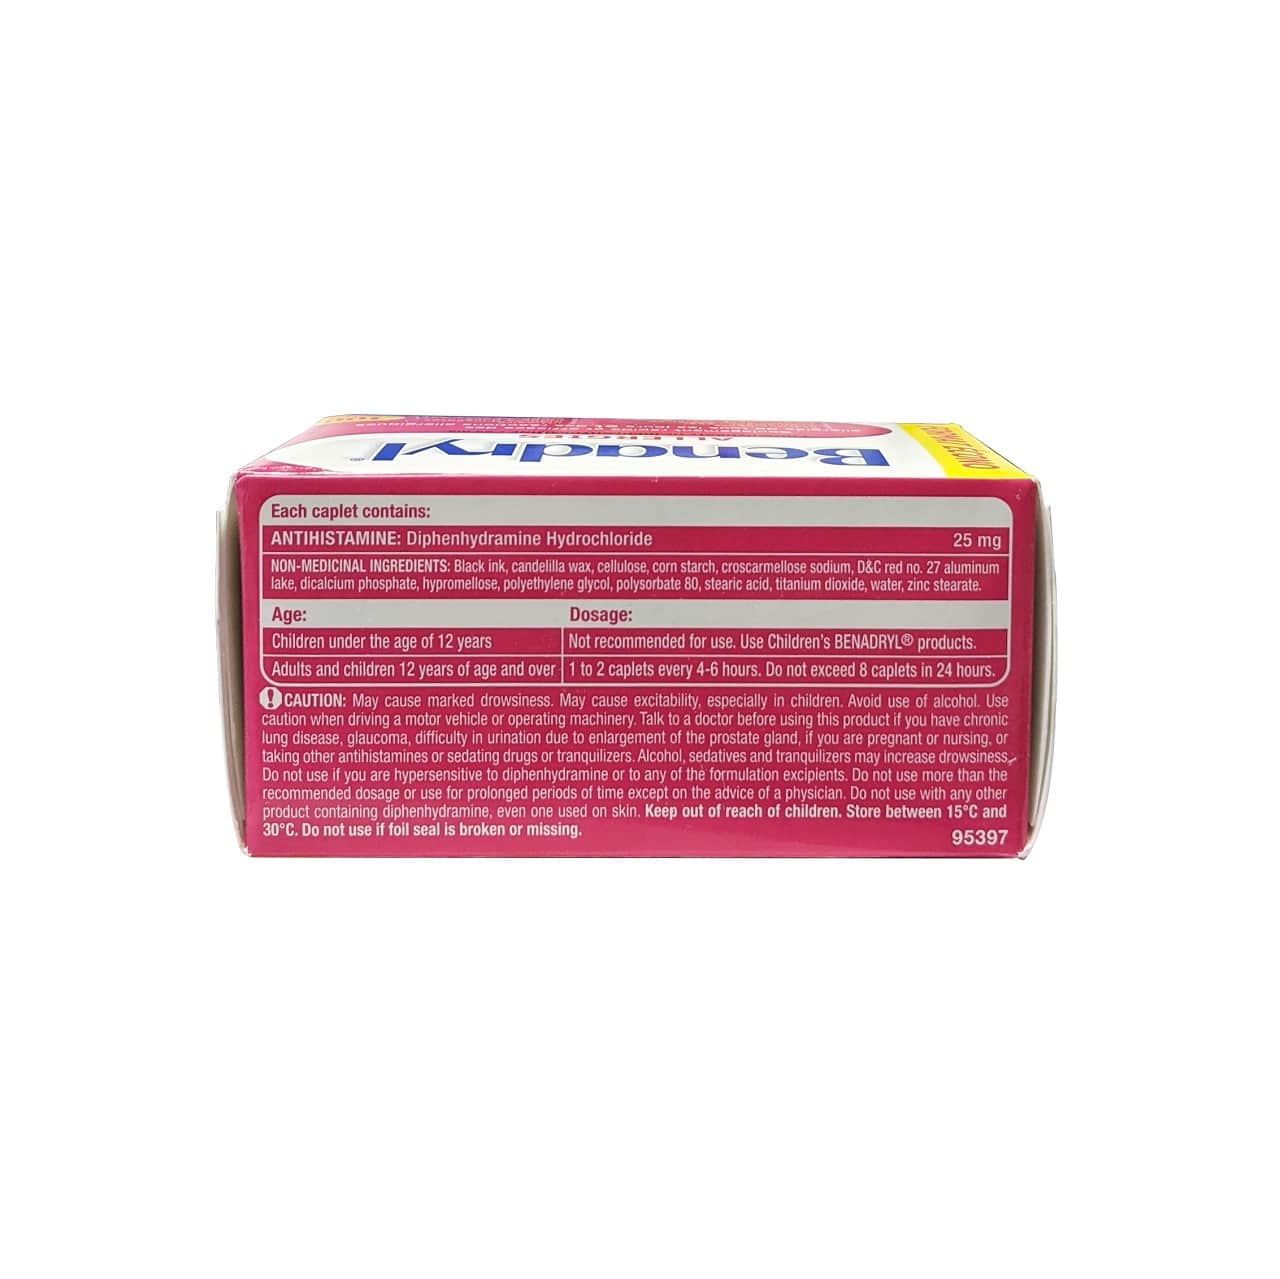 Ingredients, dose, and caution for Benadryl Allergy Caplets Diphenhydramine Hydrochloride 25 mg (100 caplets) in English